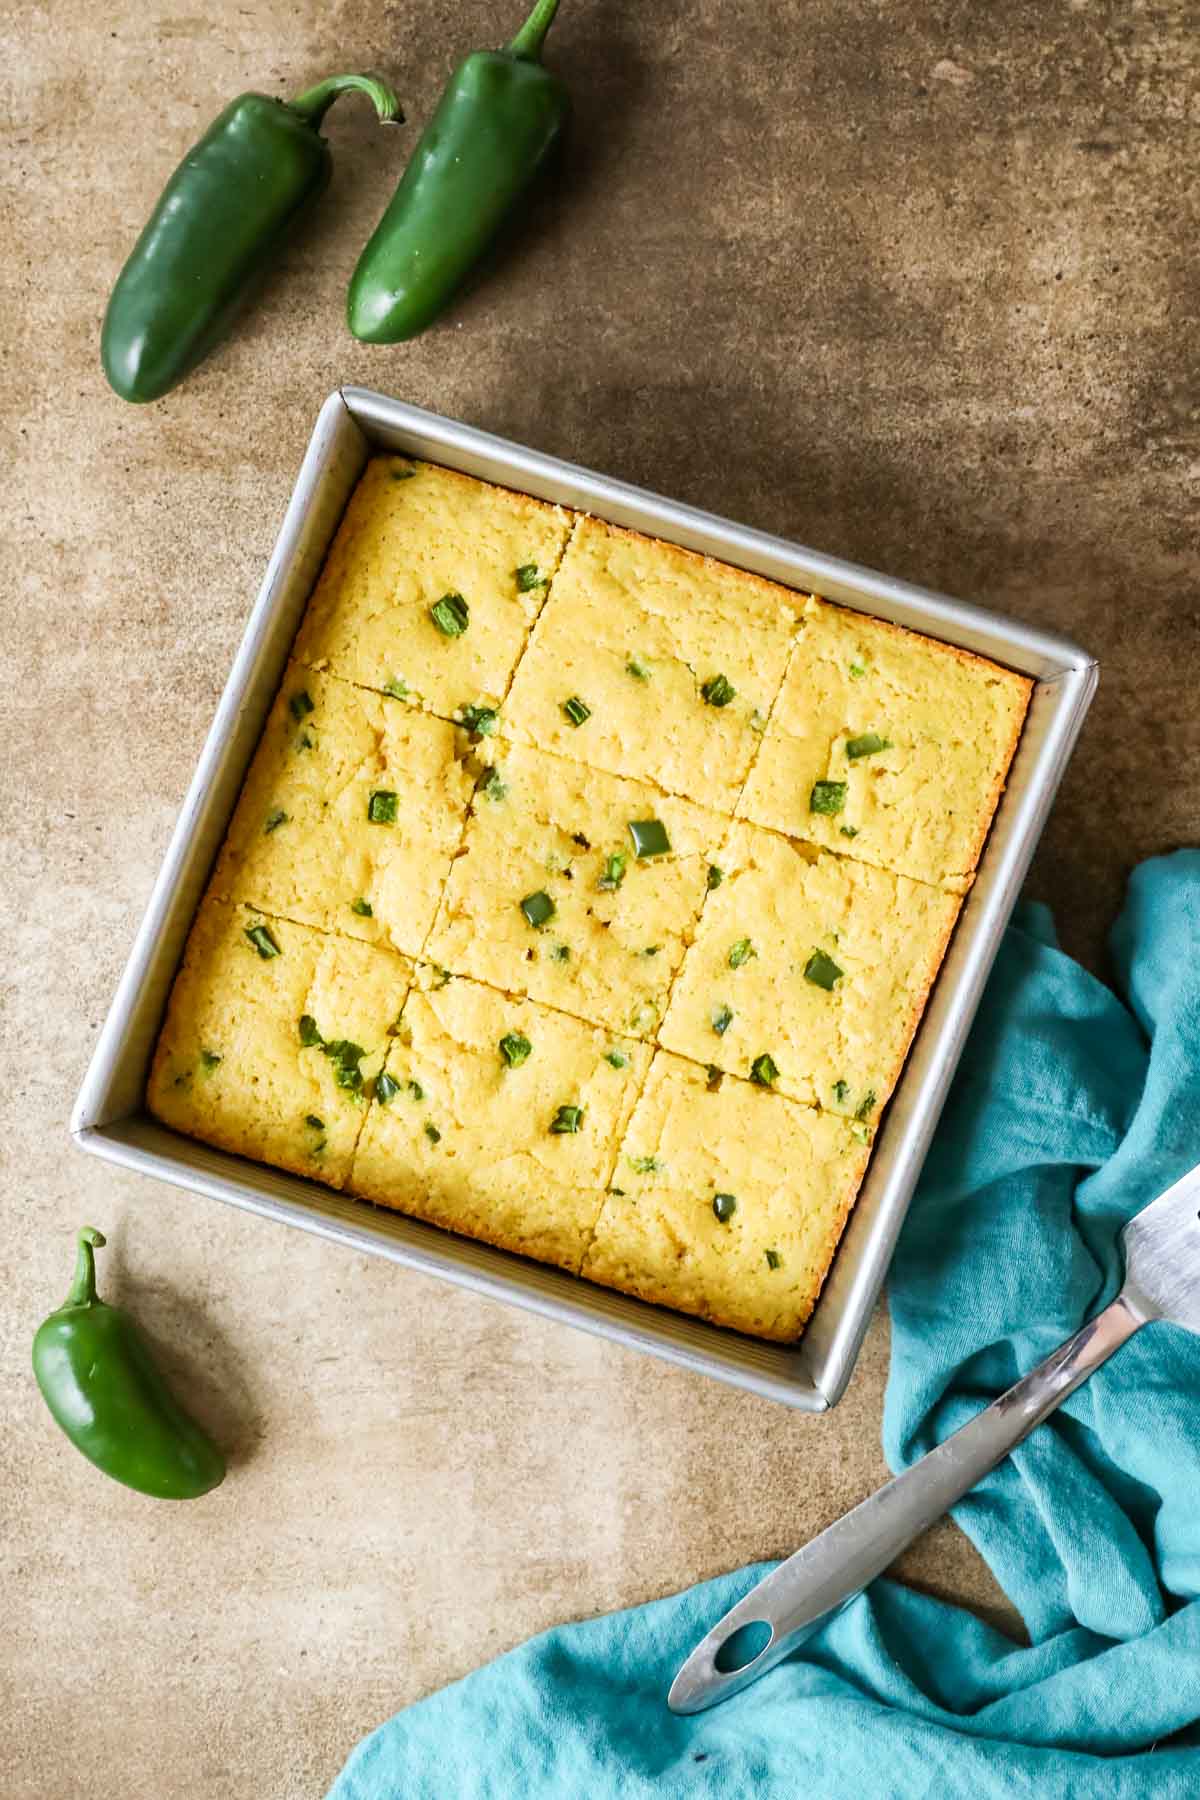 Overhead view of a square metal pan of cornbread made with jalapeno.